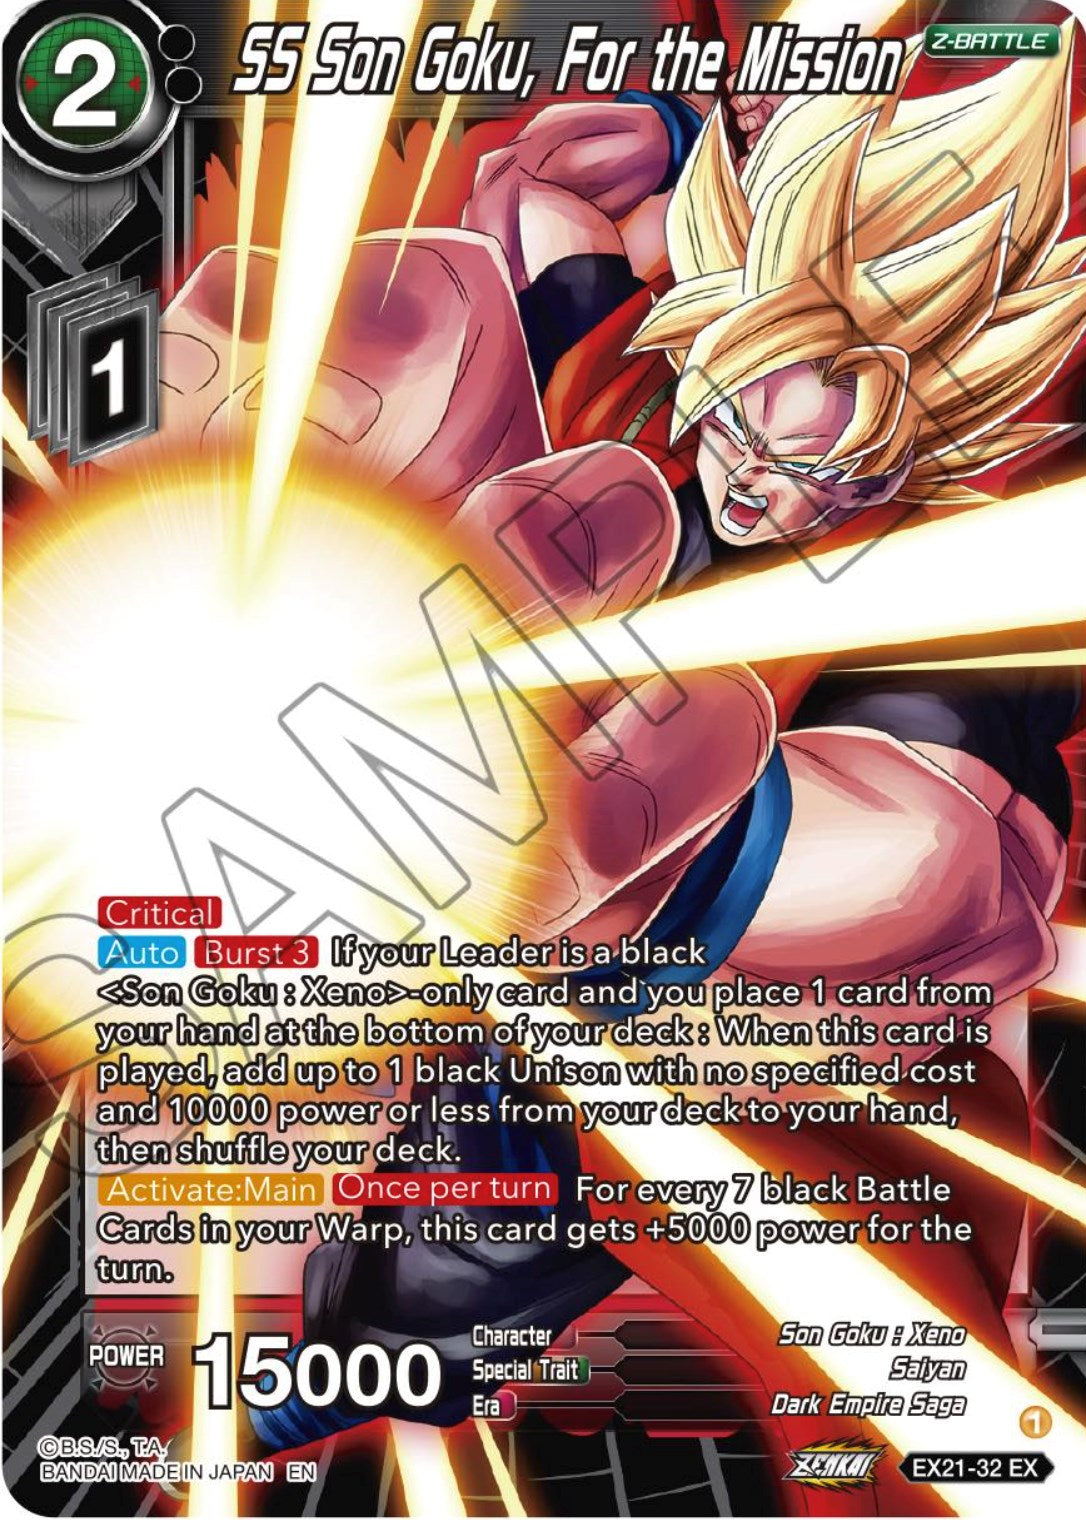 SS Son Goku, For the Mission (EX21-32) [5th Anniversary Set] | Pegasus Games WI